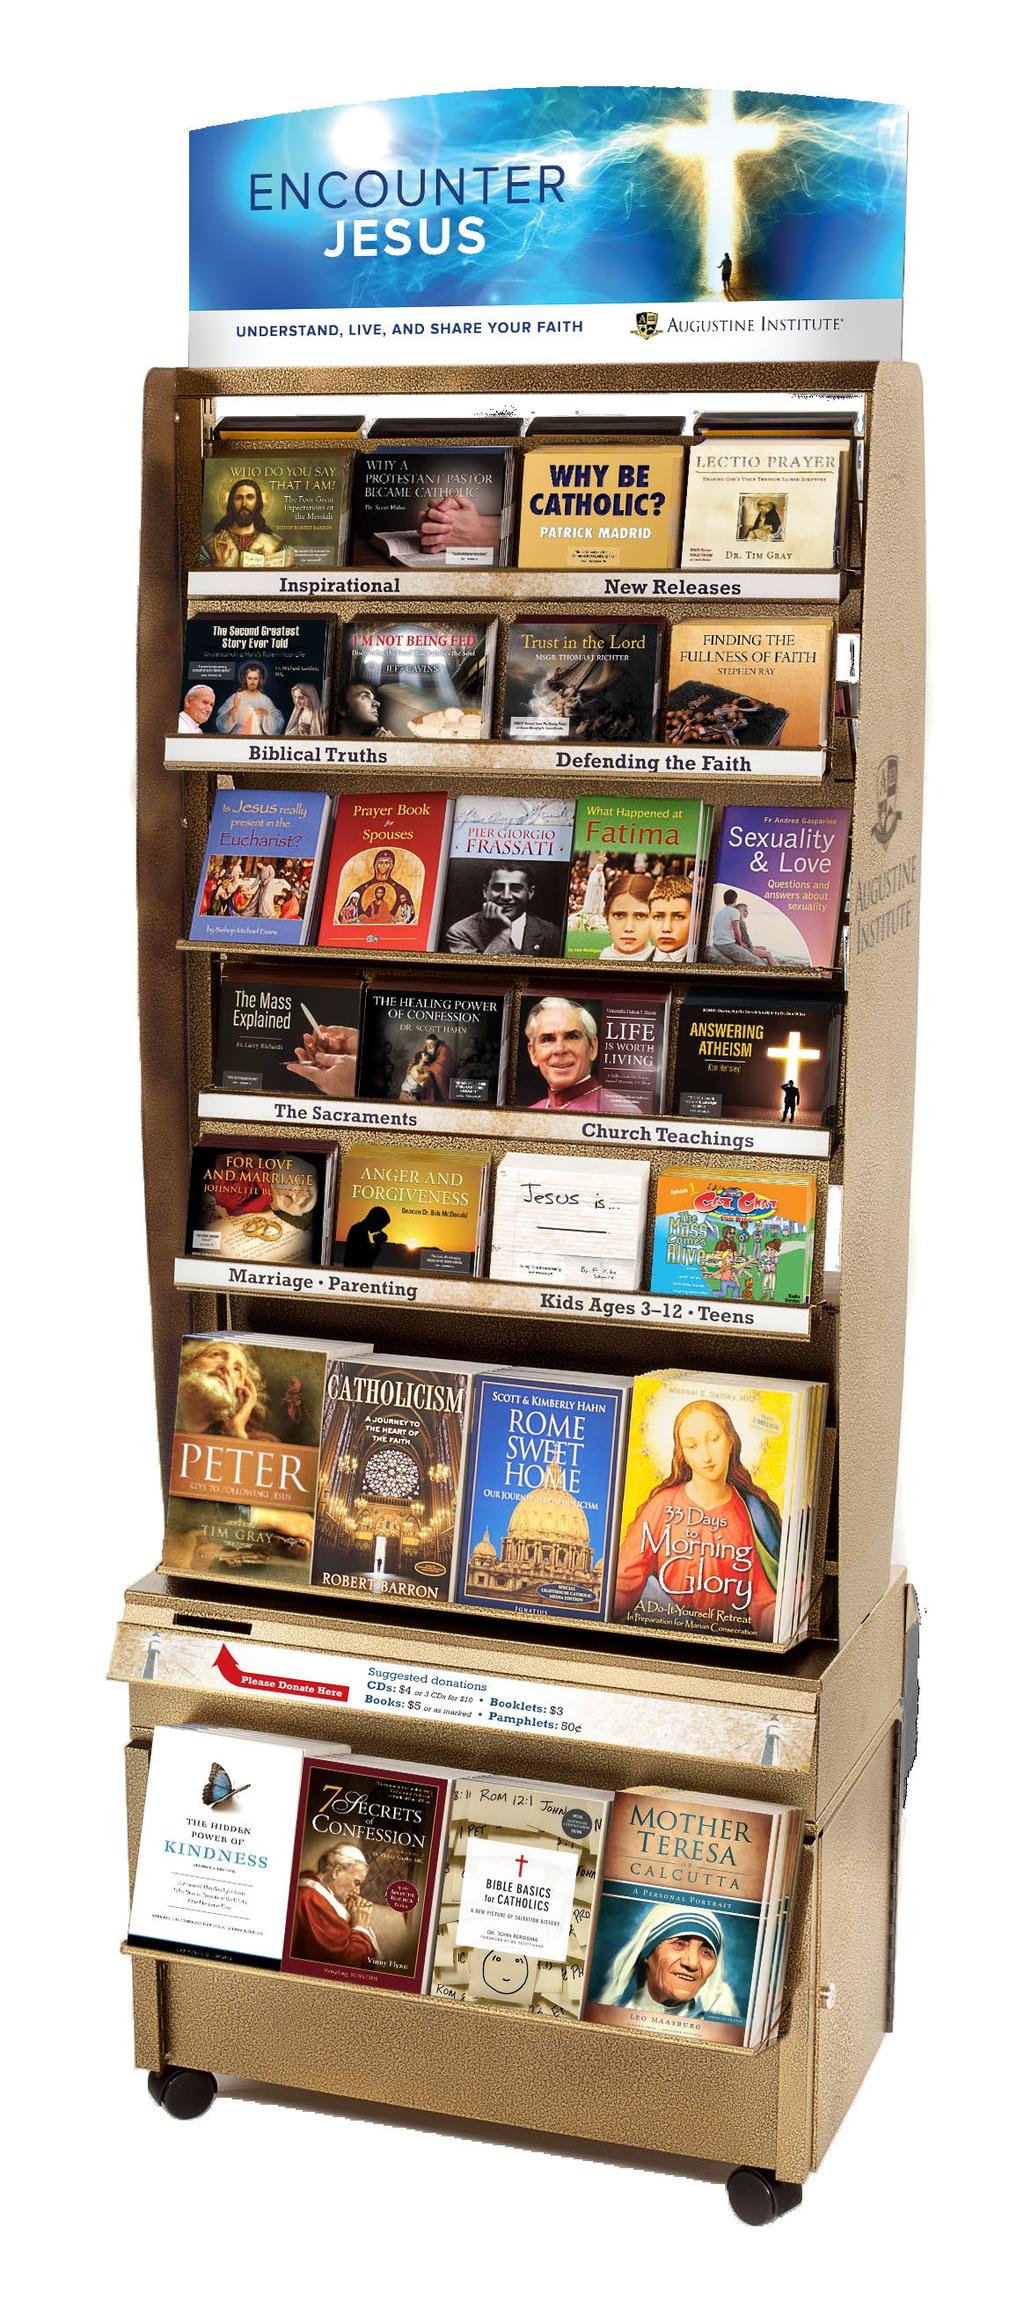 NEW & IMPROVED THE NEXT GENERATION KIOSK FAMILY FULL-SIZE STANDING KIOSK A perfect way to offer your parishioners a full breadth of authentic Catholic media.